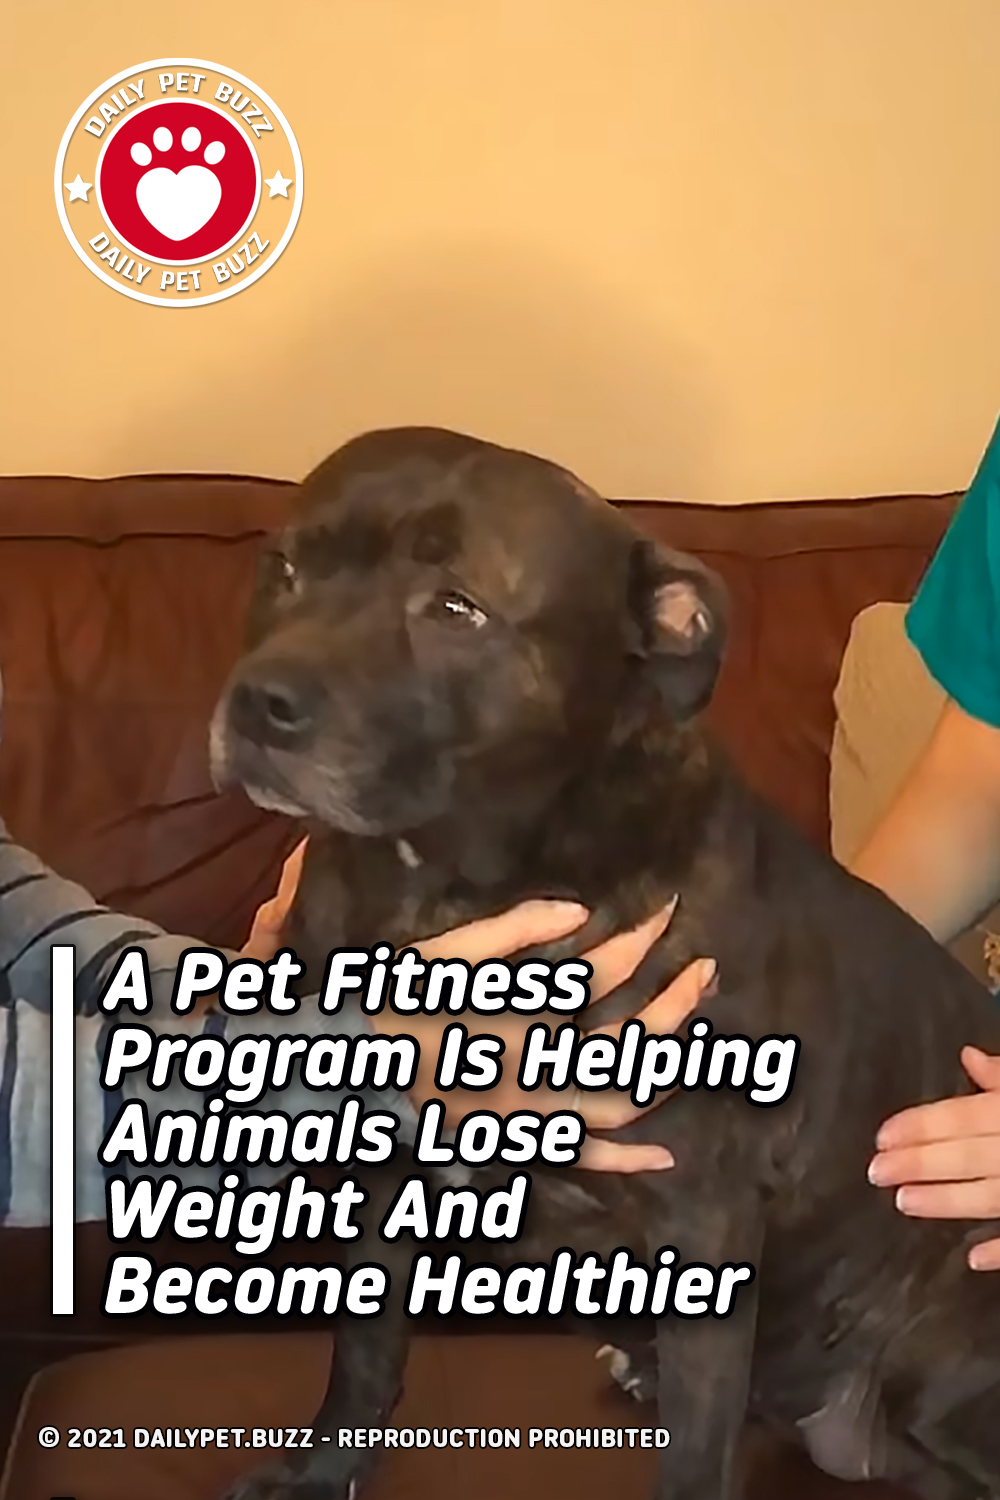 A Pet Fitness Program Is Helping Animals Lose Weight And Become Healthier